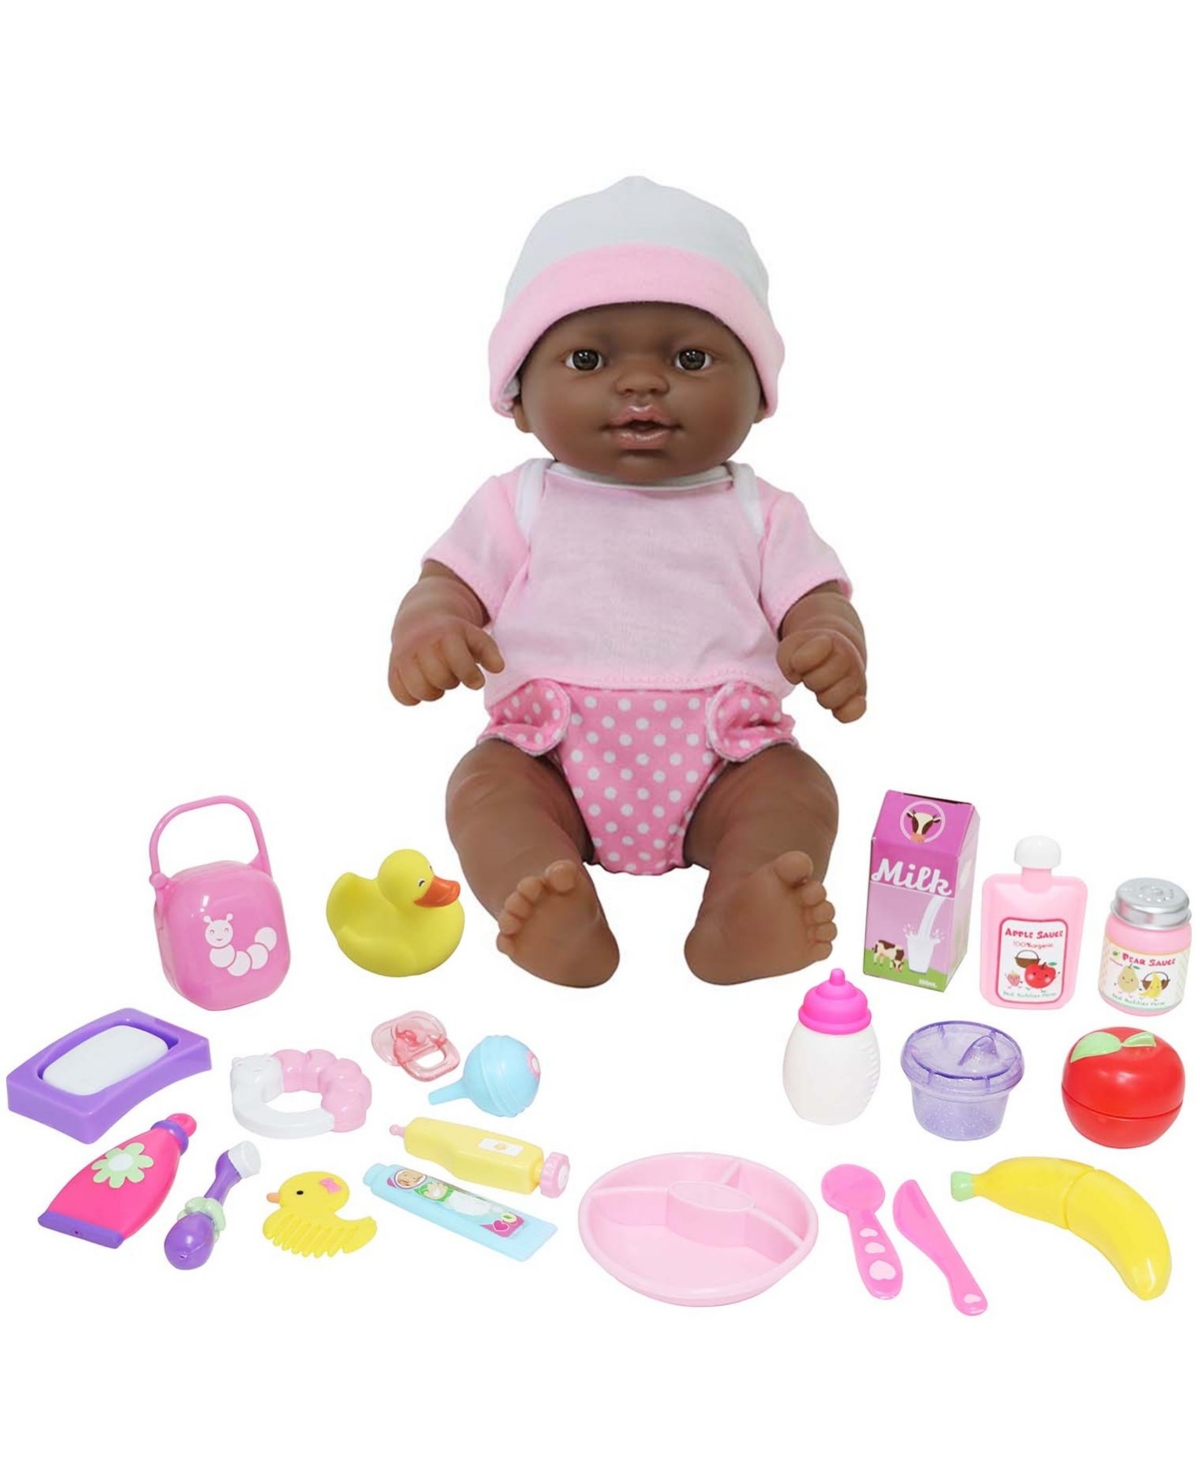 Jc Toys Kids' La Newborn African American 12" Baby Doll Gift Set, 25 Pieces In Pink